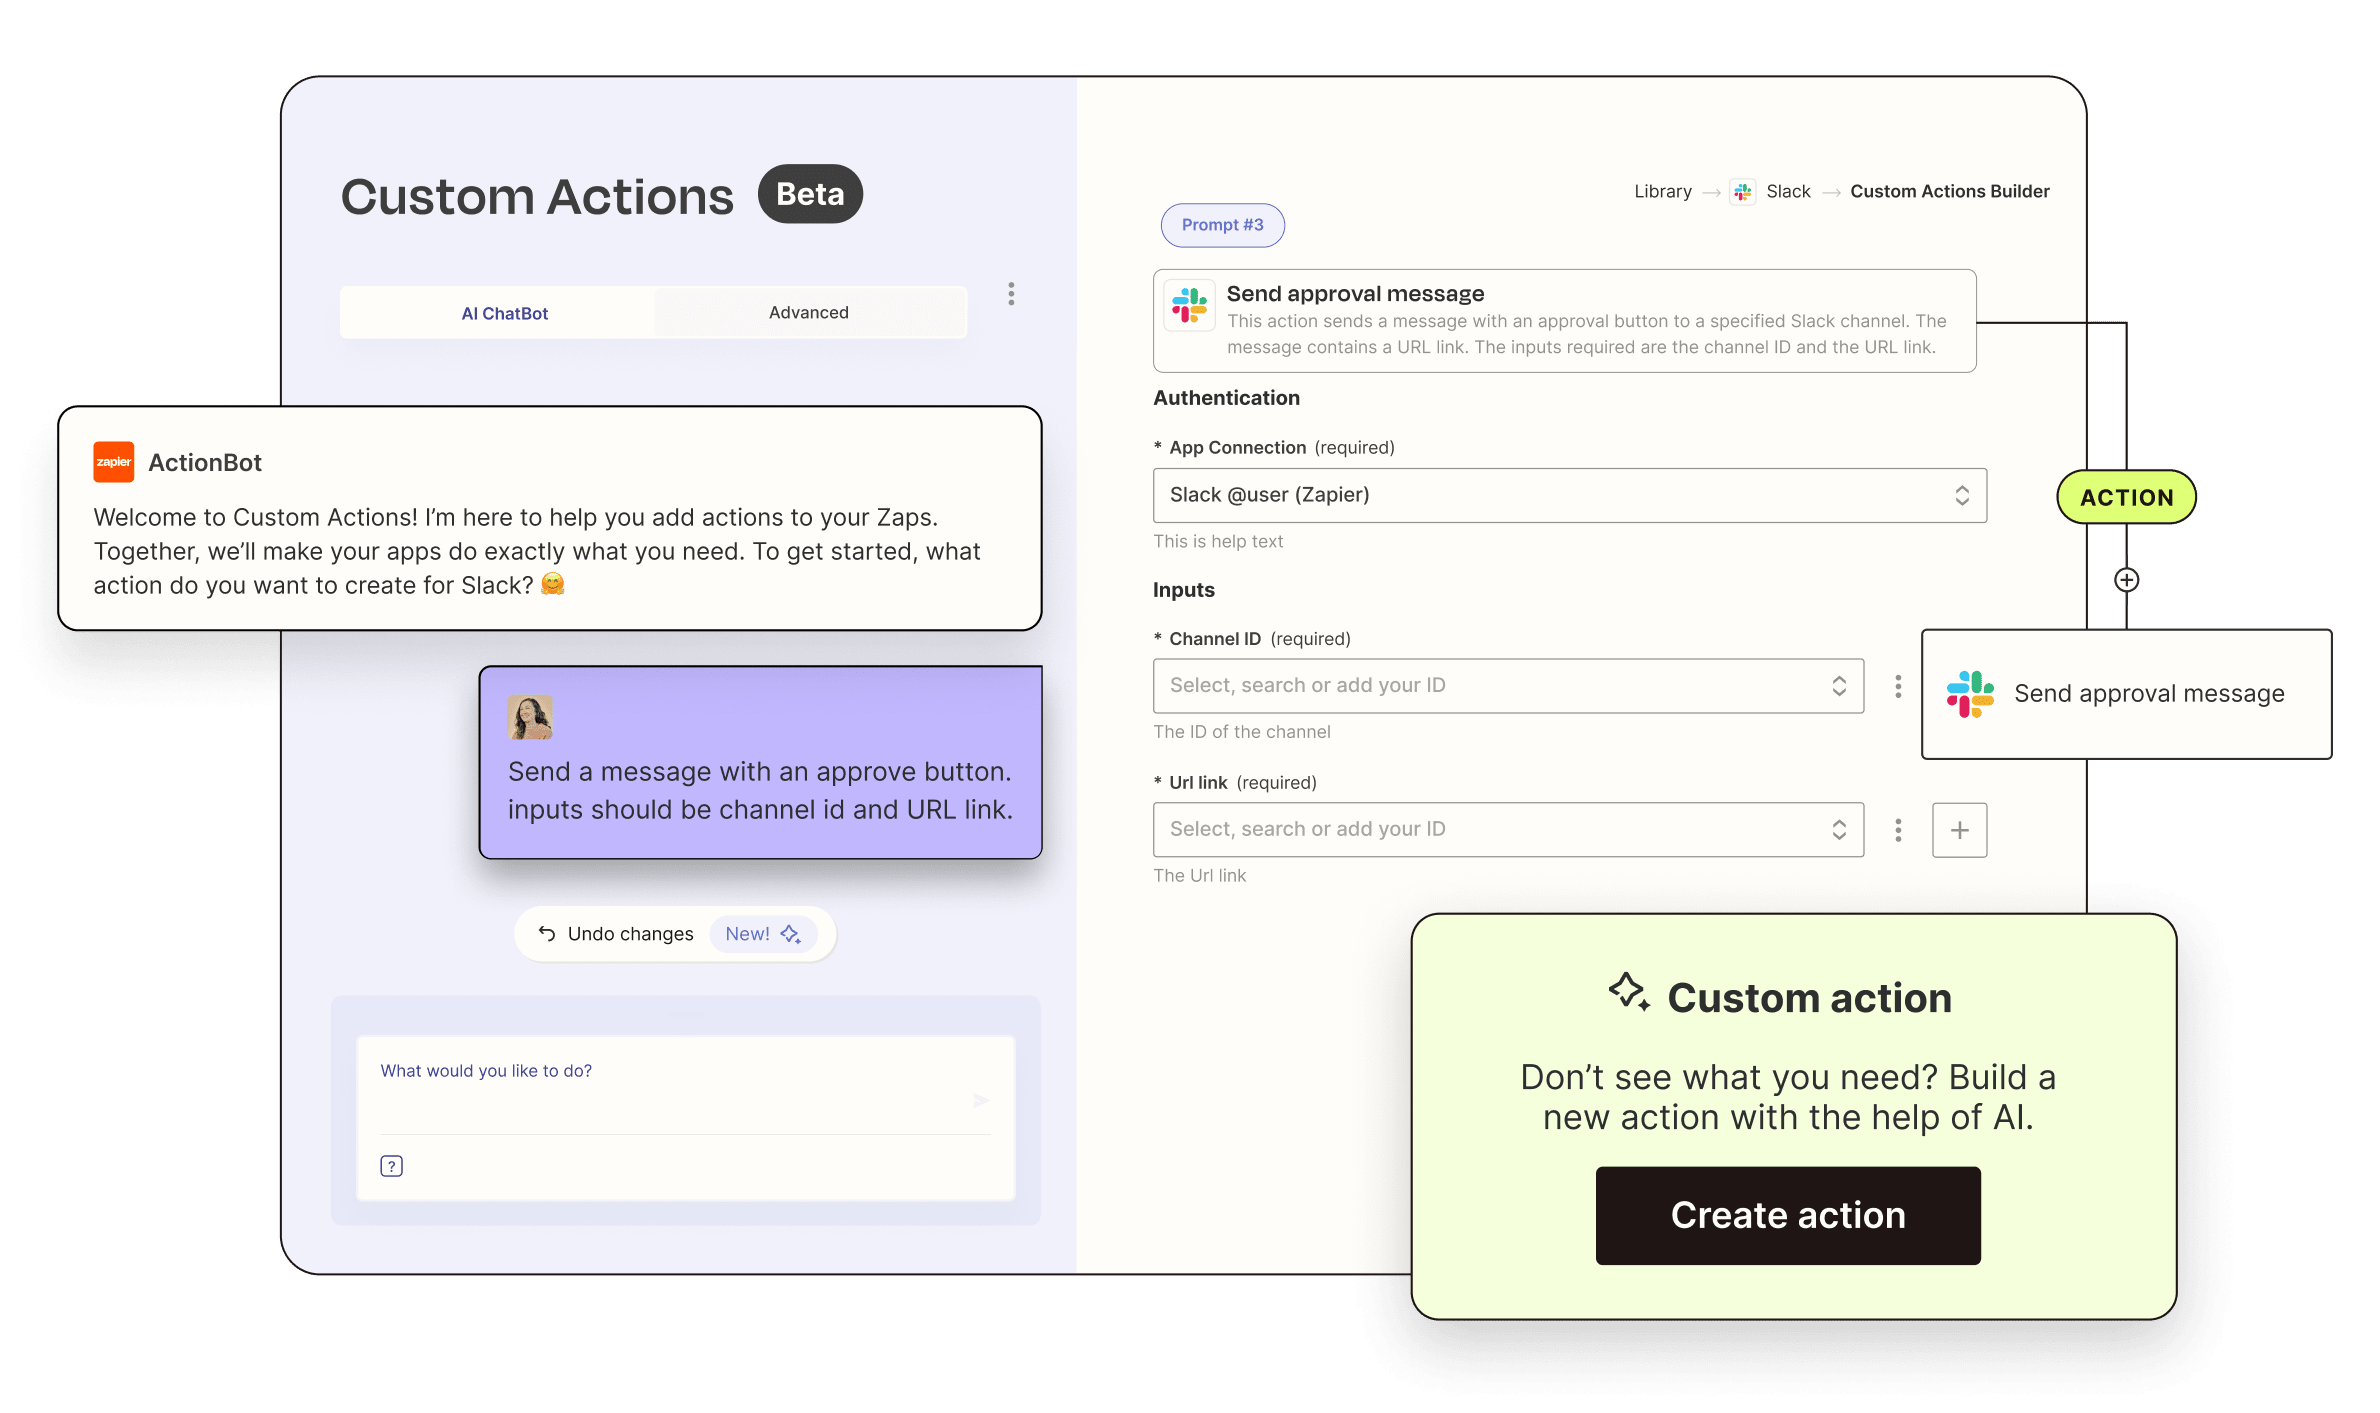 Custom Actions interface with a custom action of sending an approval message in slack with an approve button